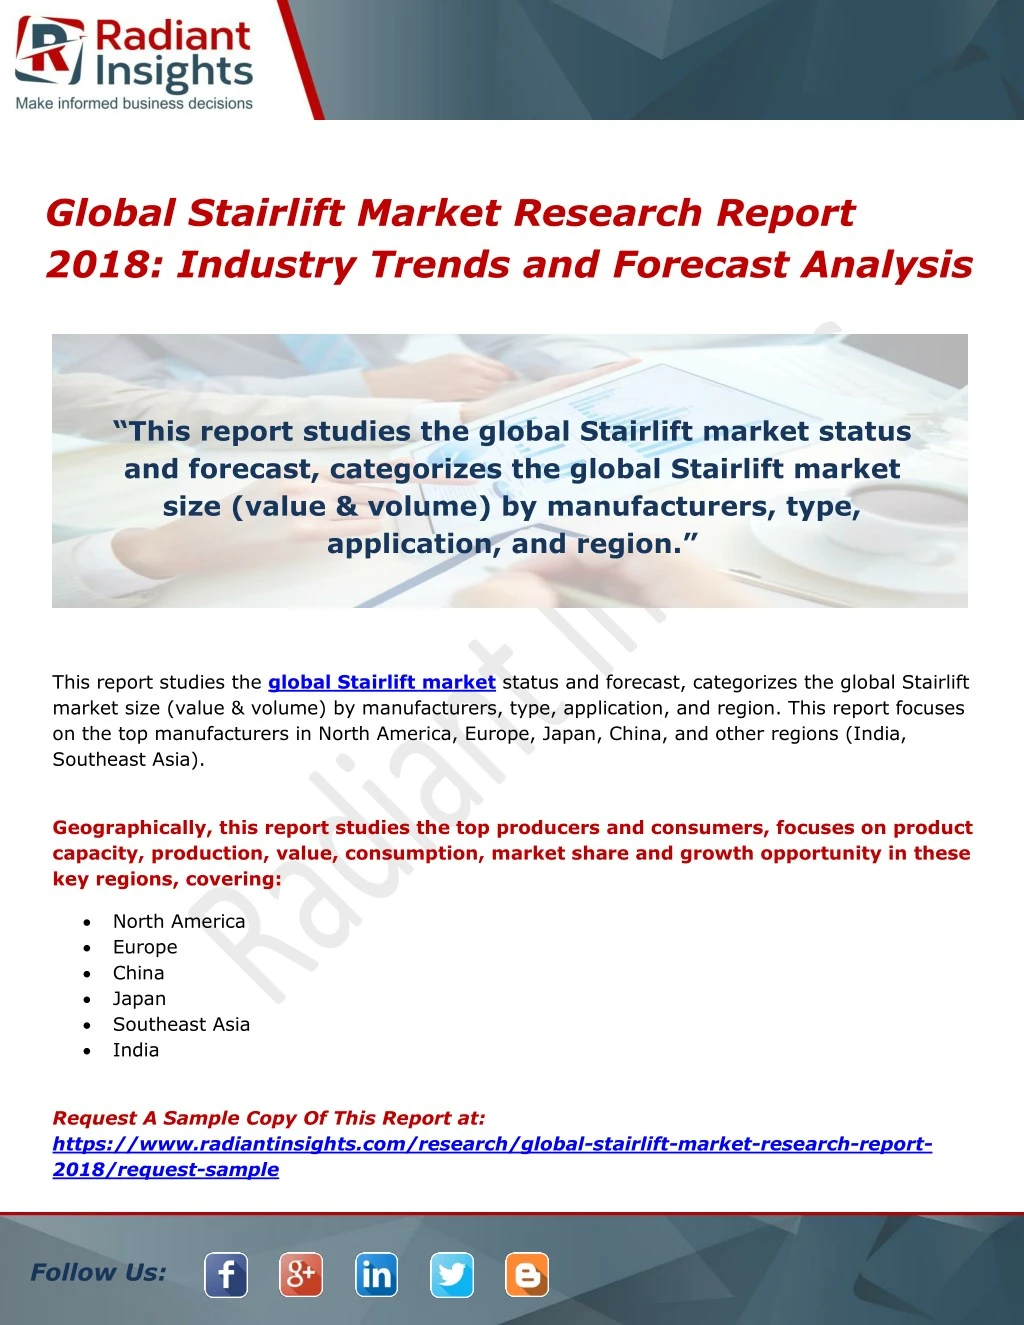 global stairlift market research report 2018